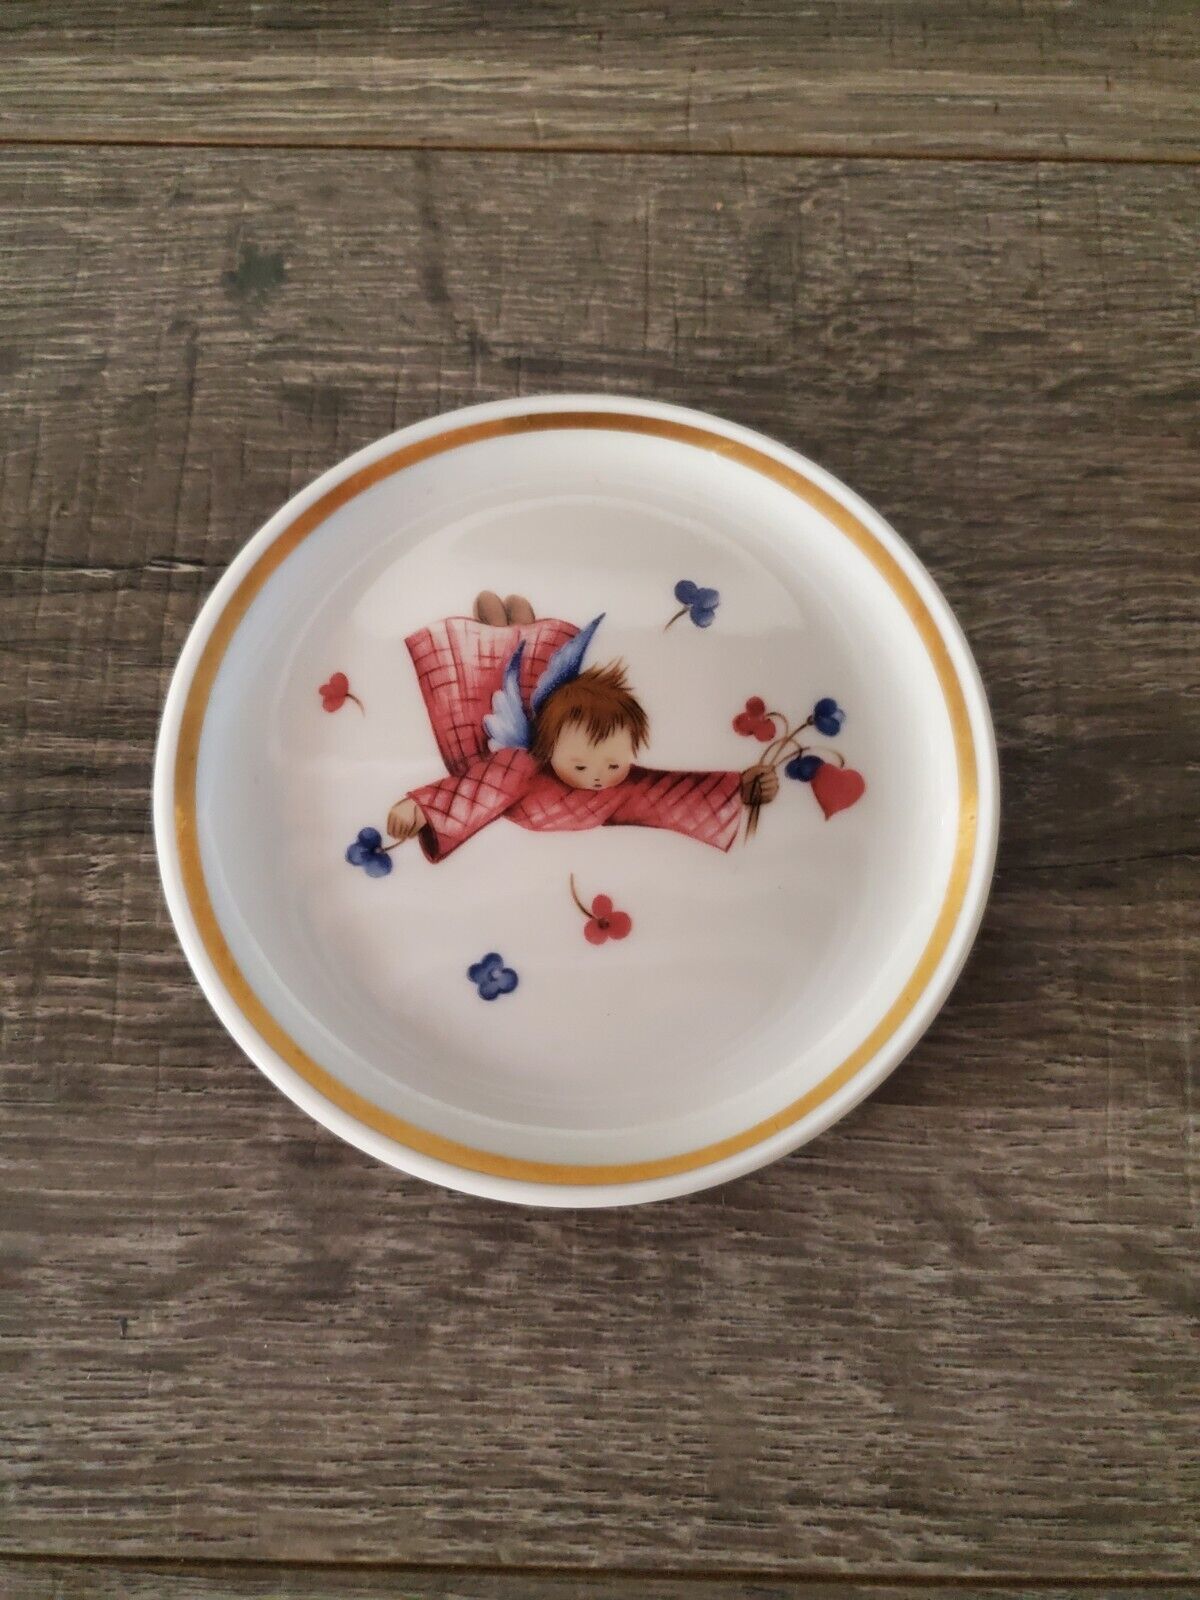 The Berta Hummel Museum Miniature Plate 1978 4” Plate Girl Flying with flowers 